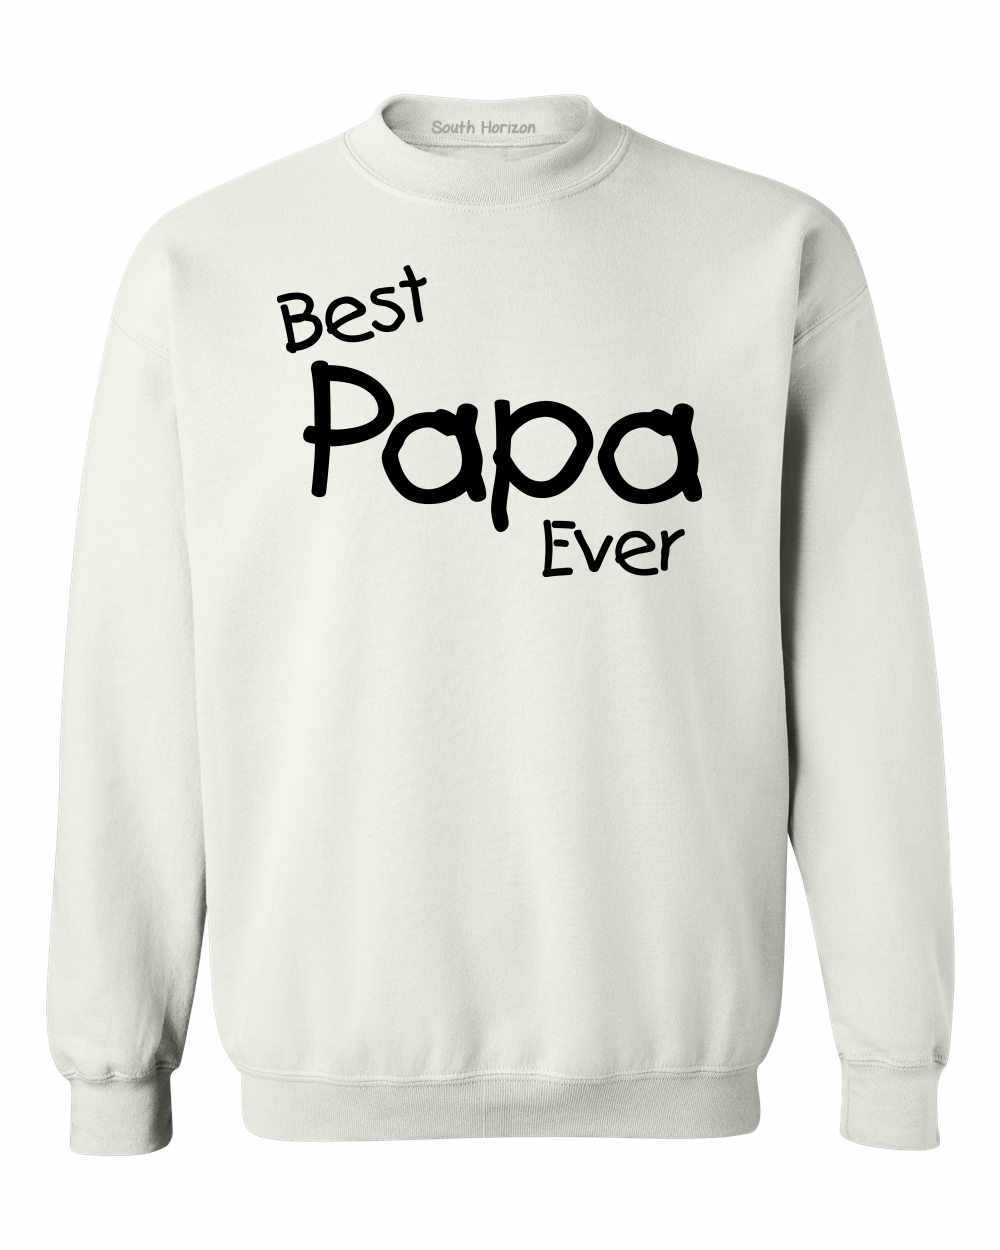 Best Papa Ever (#872) on SweatShirt in 9 colors – South Horizon T-Shirt  Company